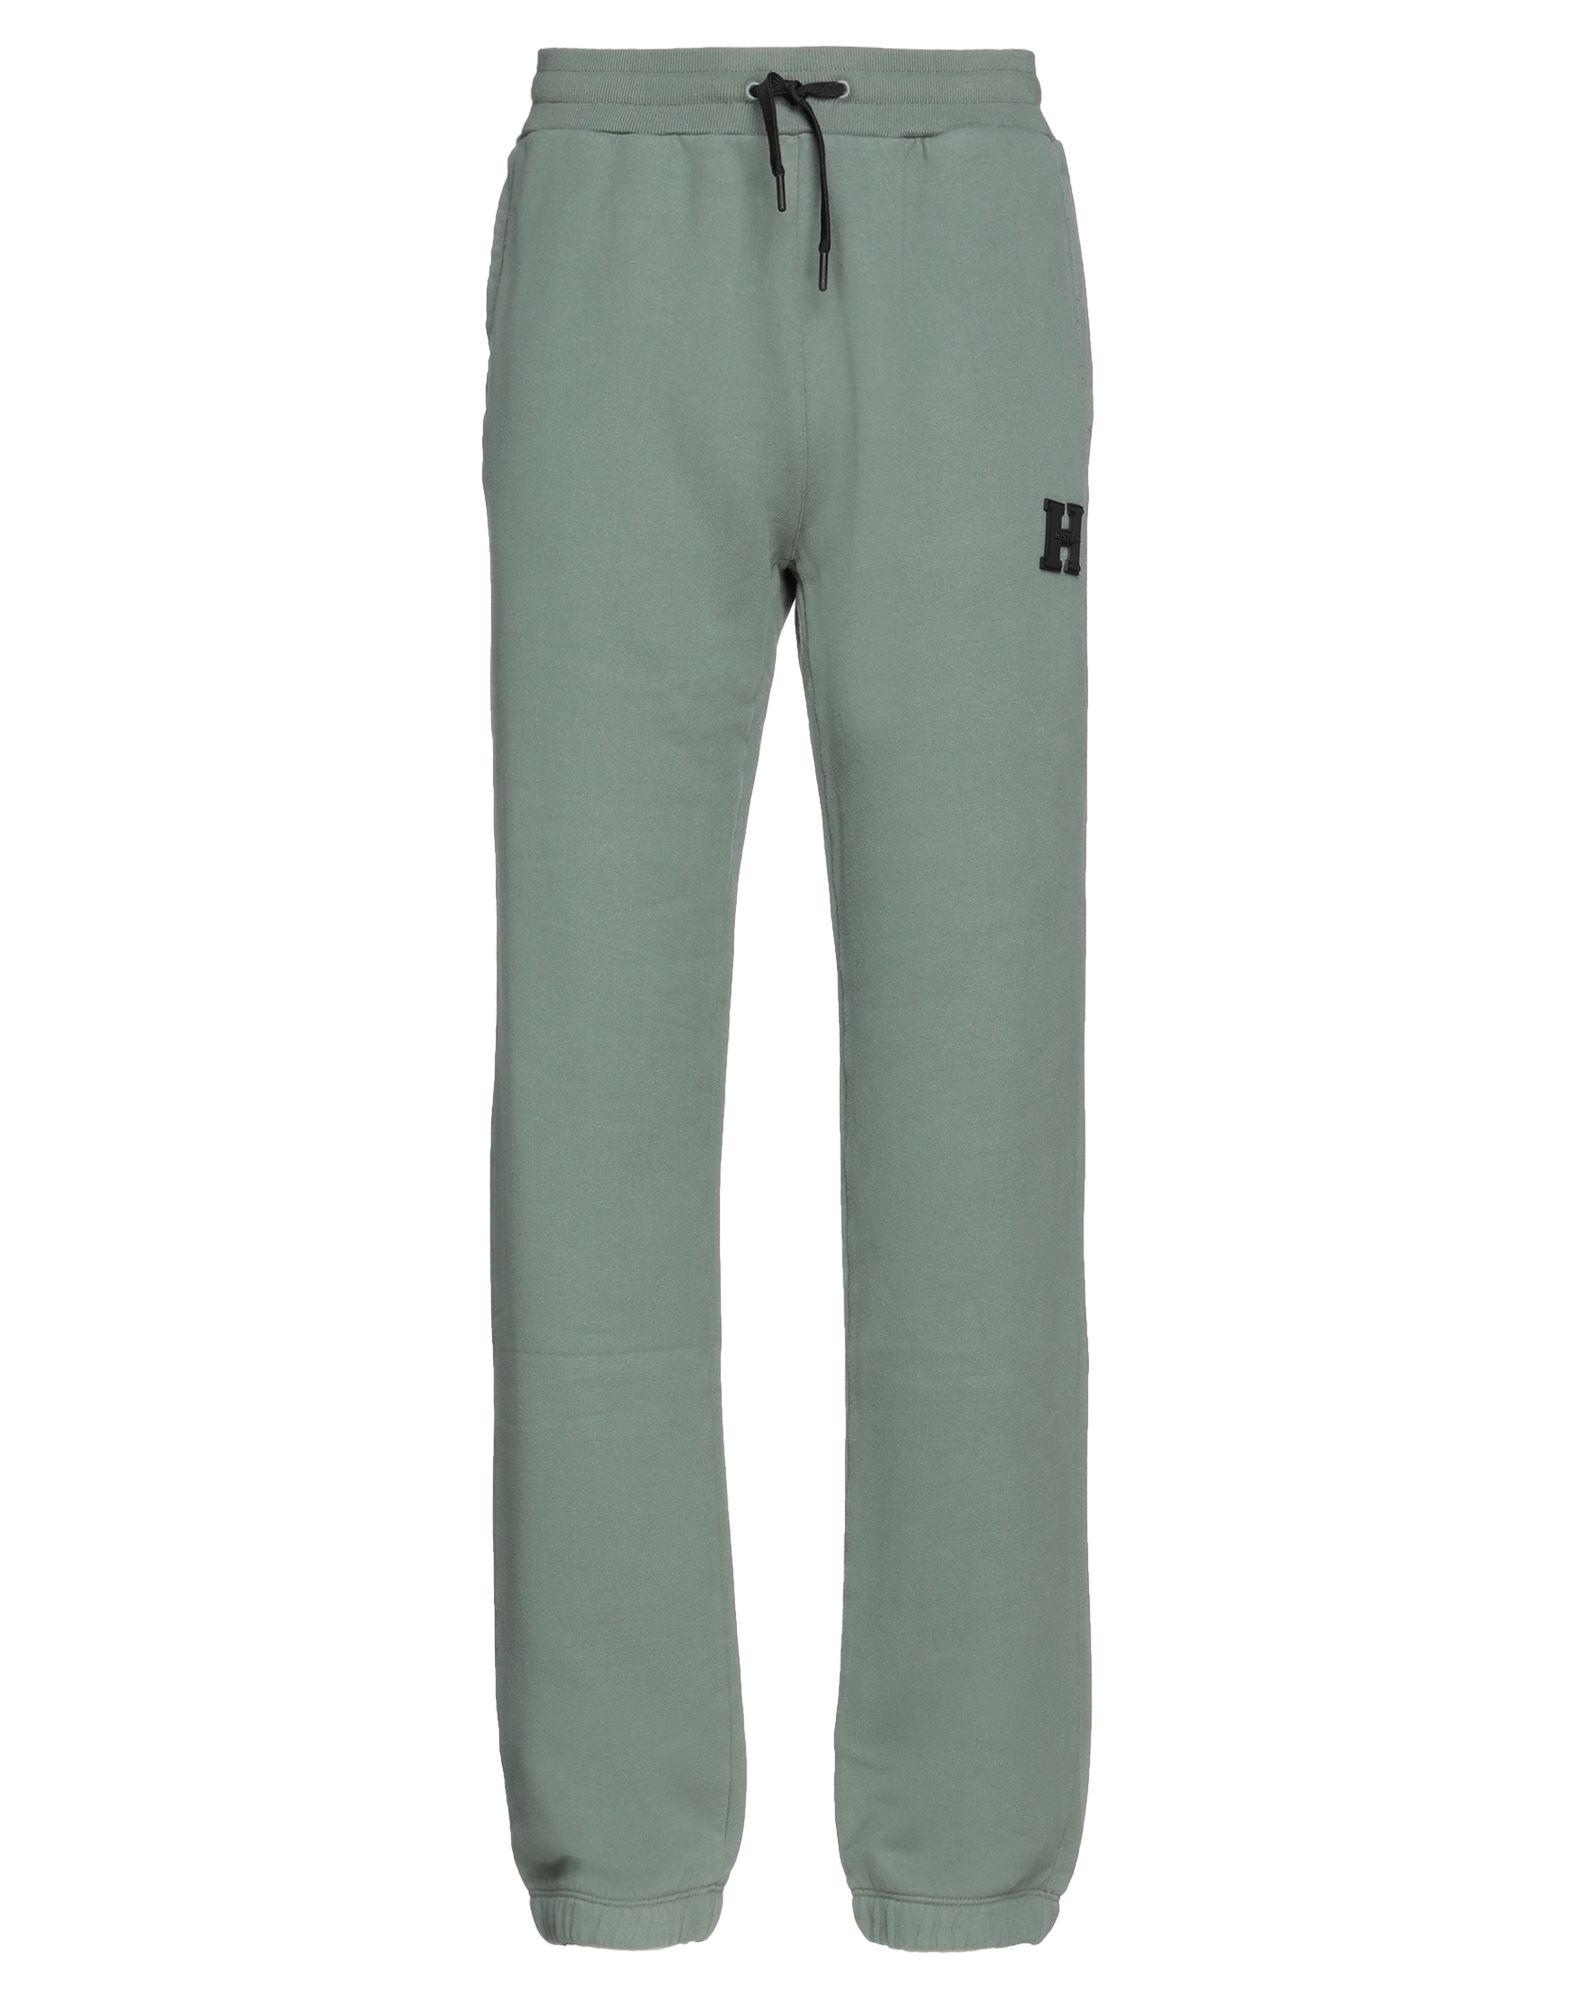 Historic Pants In Sage Green